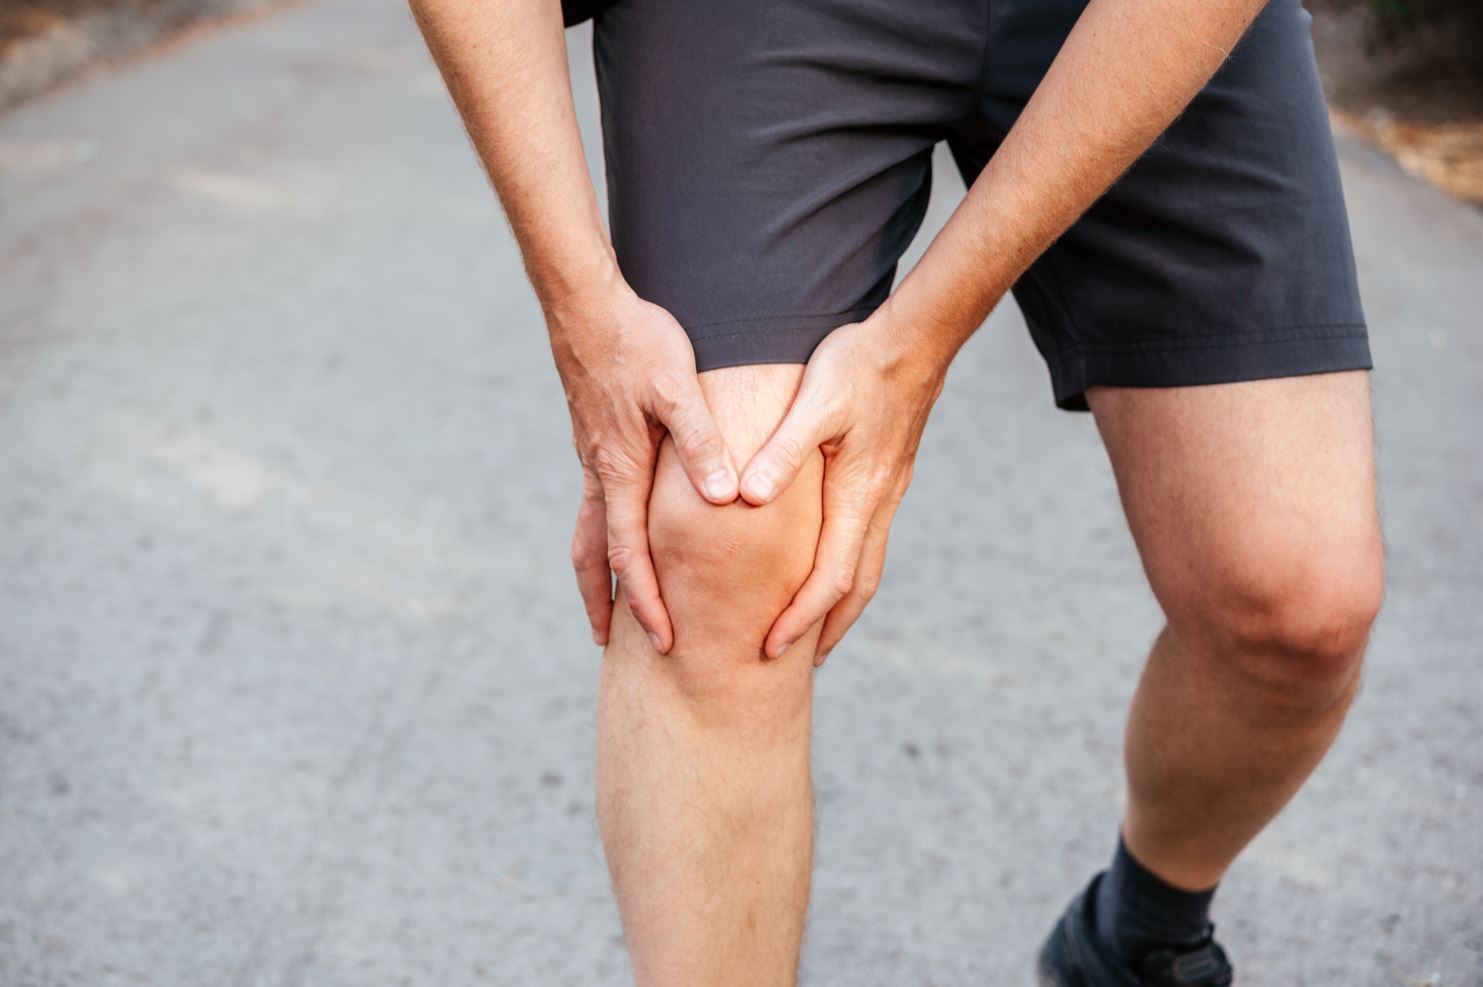 Signs and symptoms of Runners Knee (Patellofemoral Pain Syndrome)